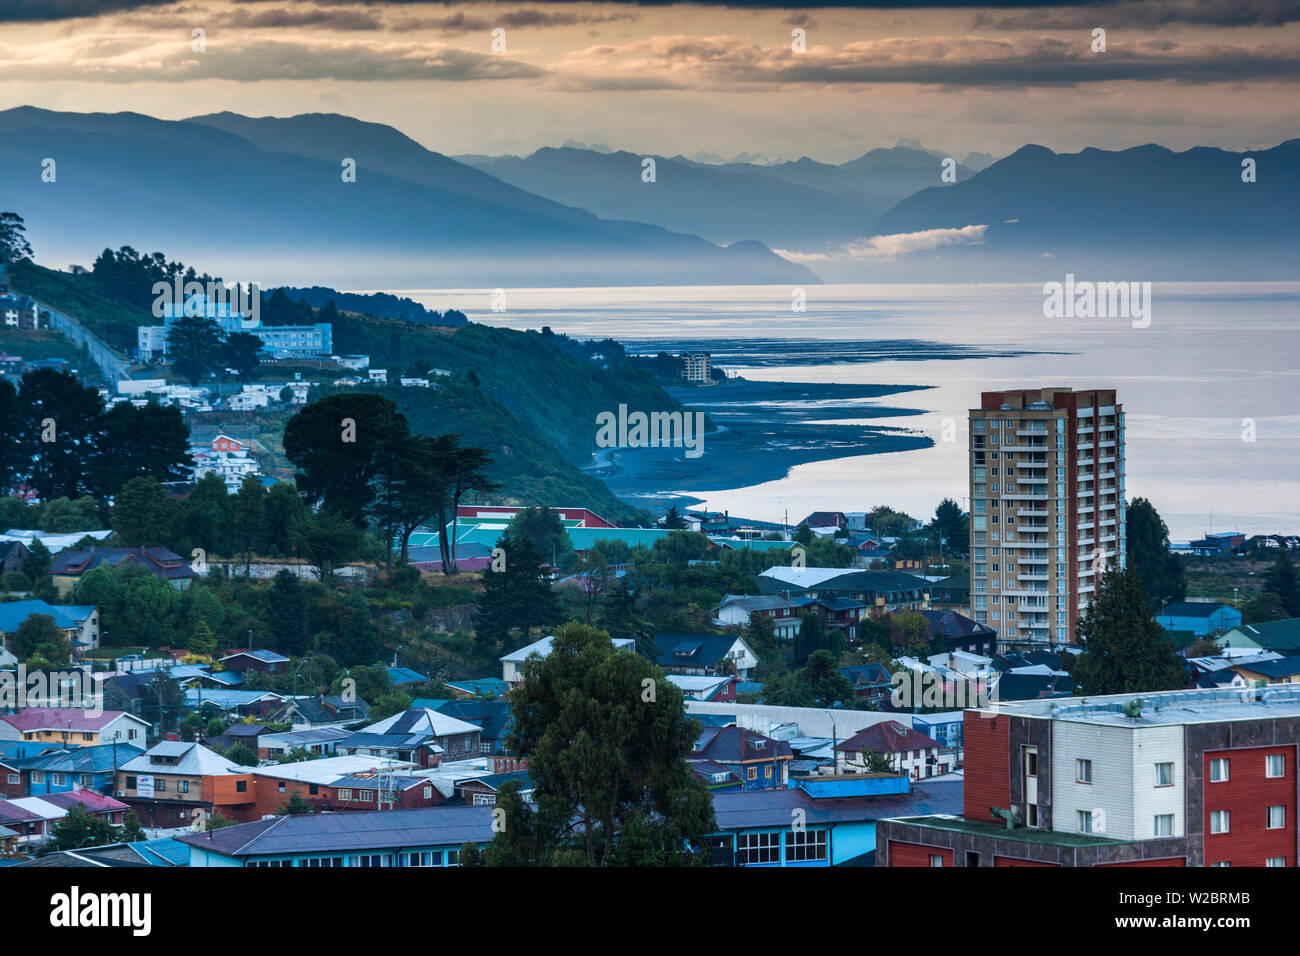 Chile, Los Lagos Region, Puerto Montt, elevated town view Stock Photo